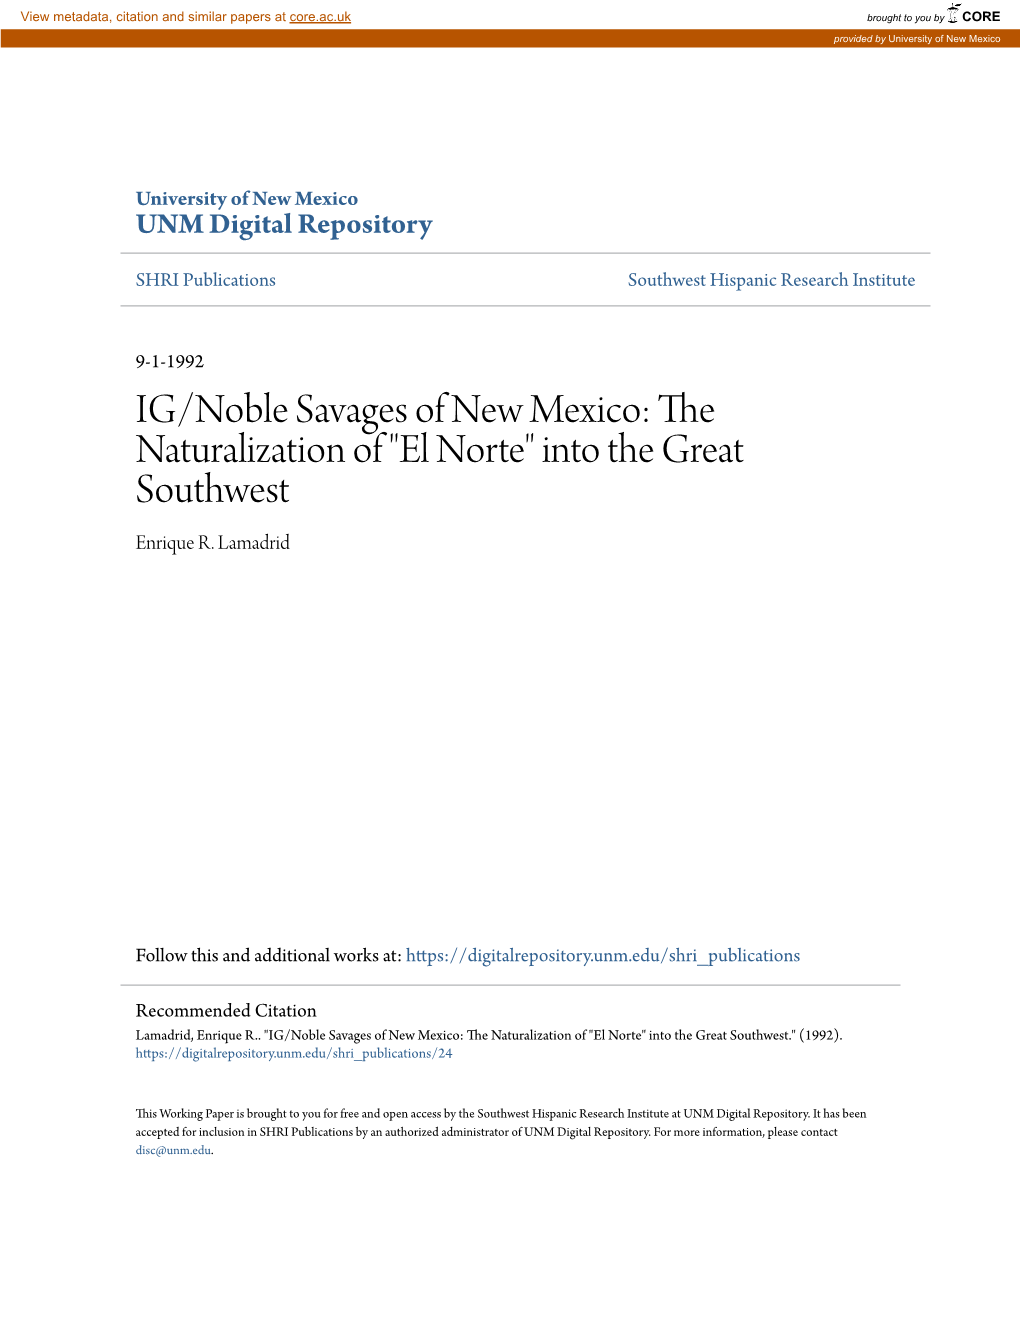 IG/Noble Savages of New Mexico: the Naturalization of "El Norte" Into the Great Southwest Enrique R